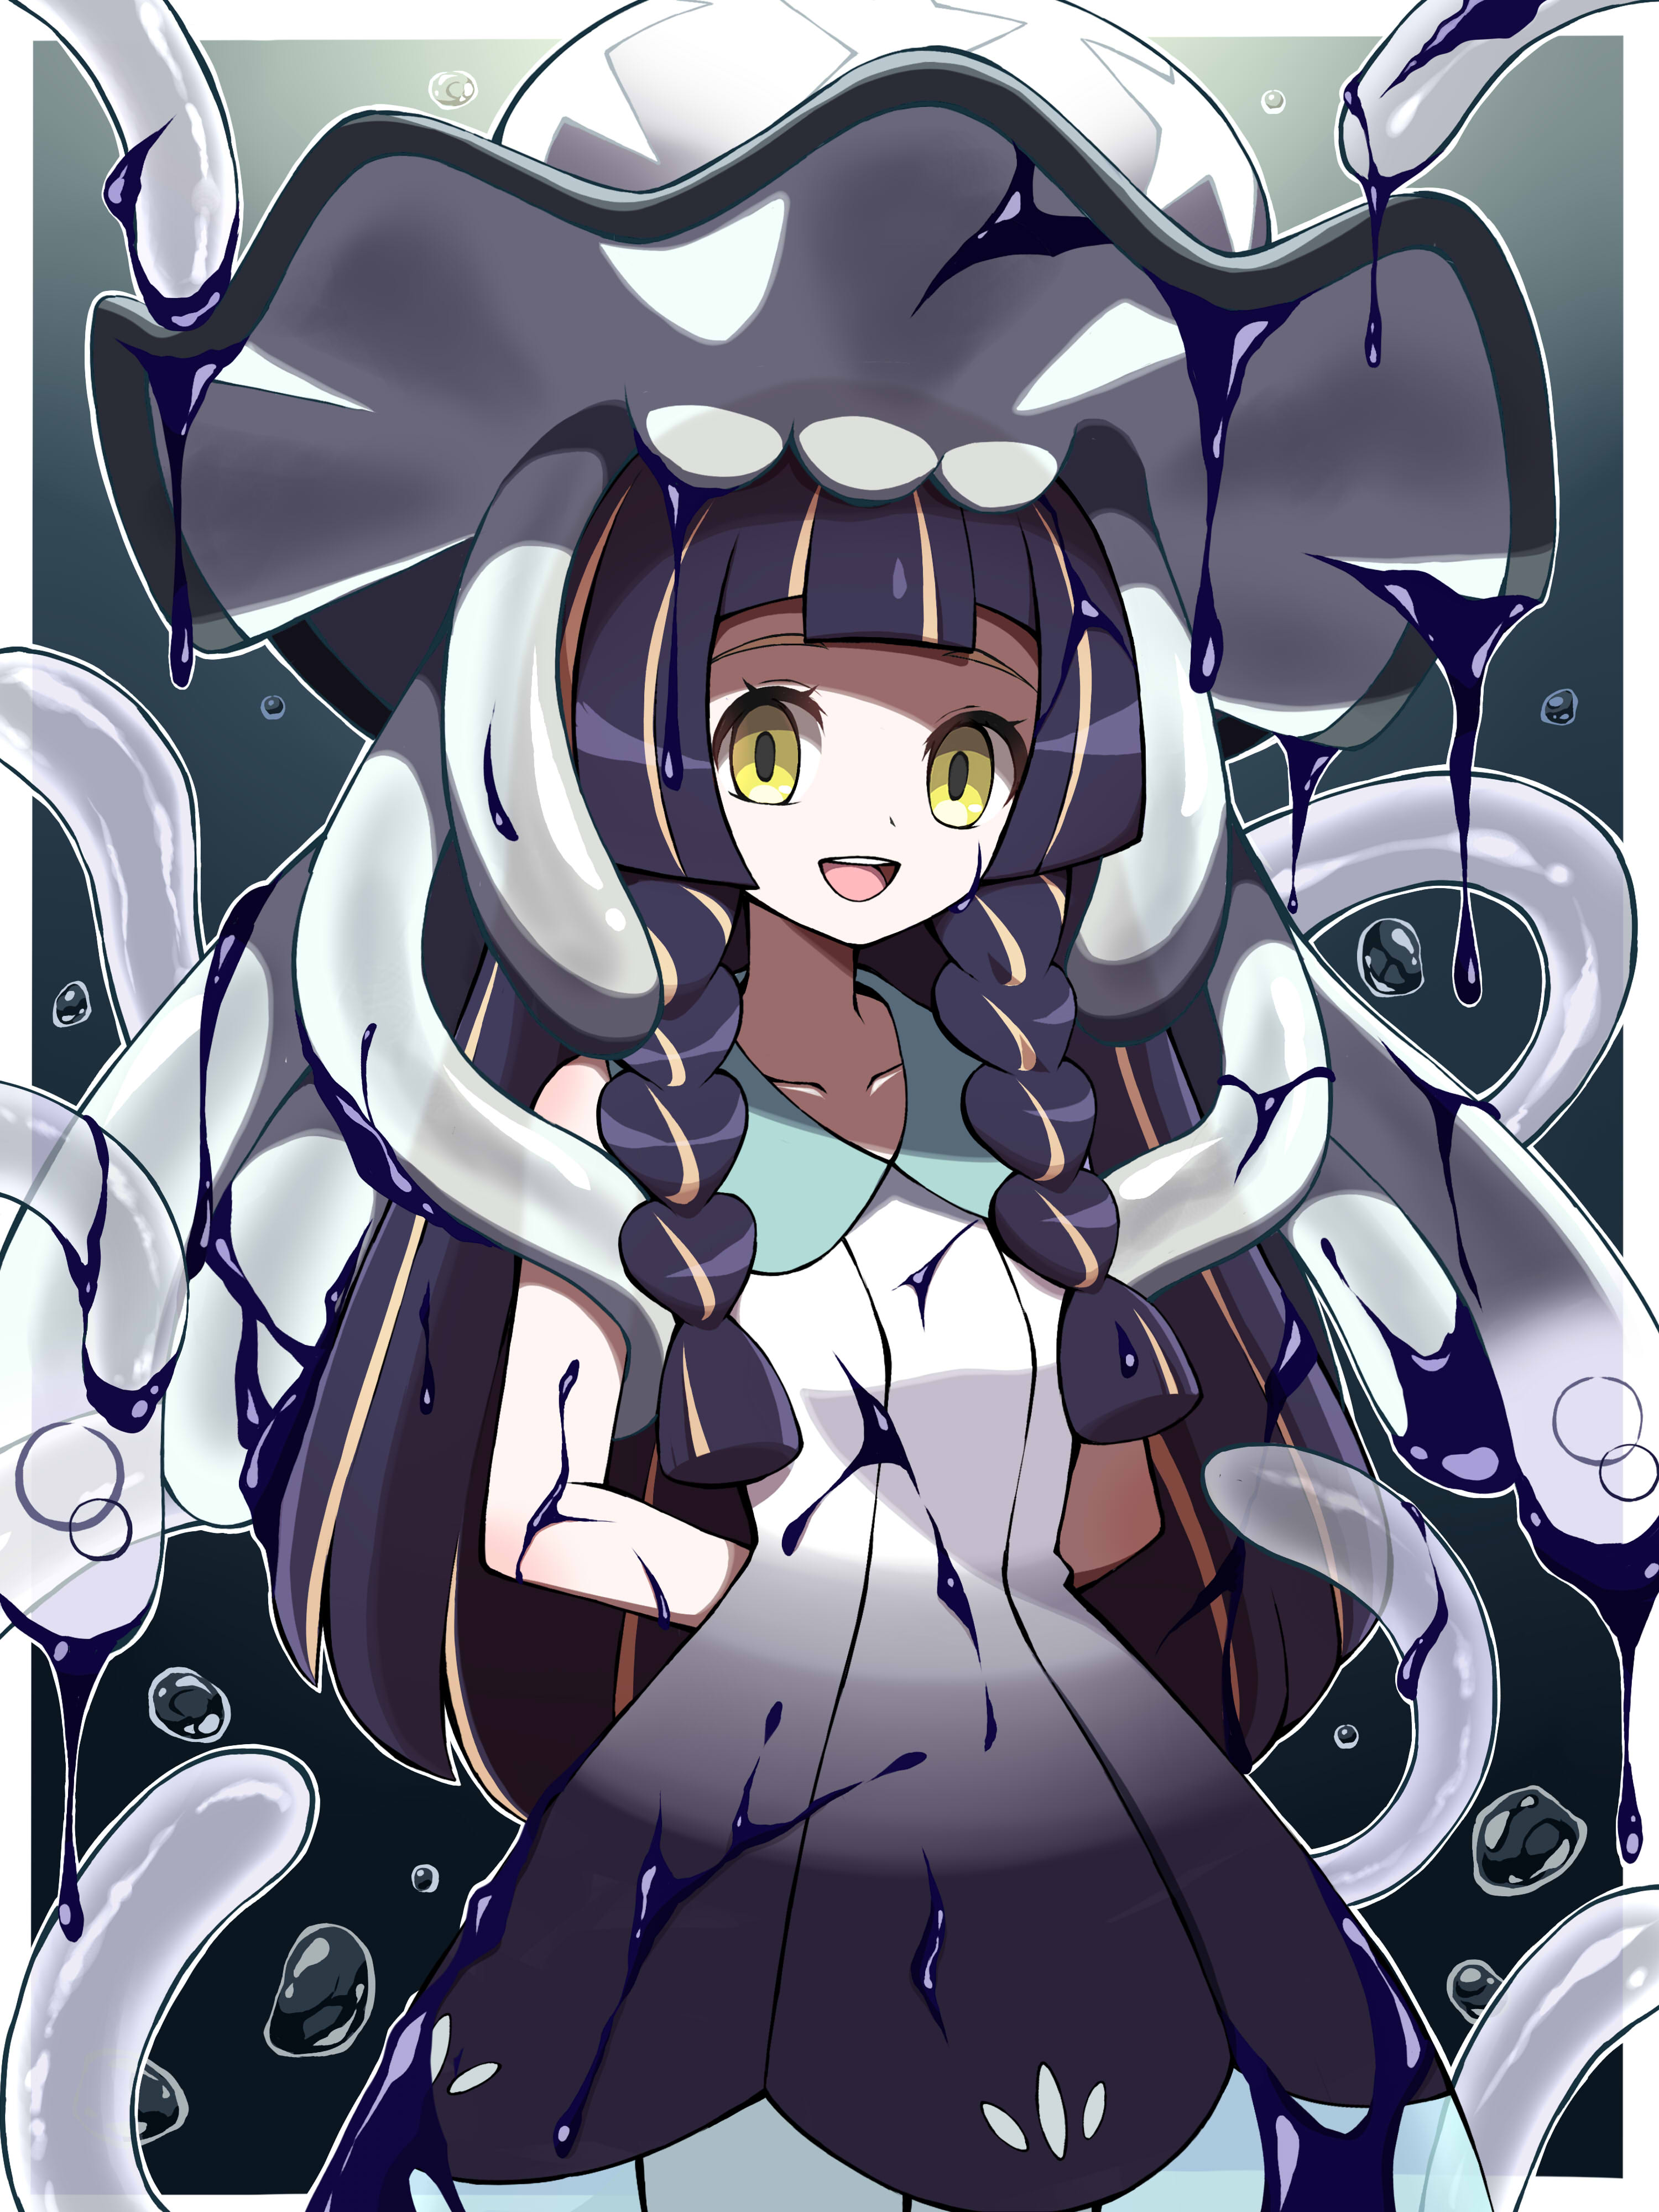 lillie and nihilego (pokemon and 1 more) drawn by shabana_may